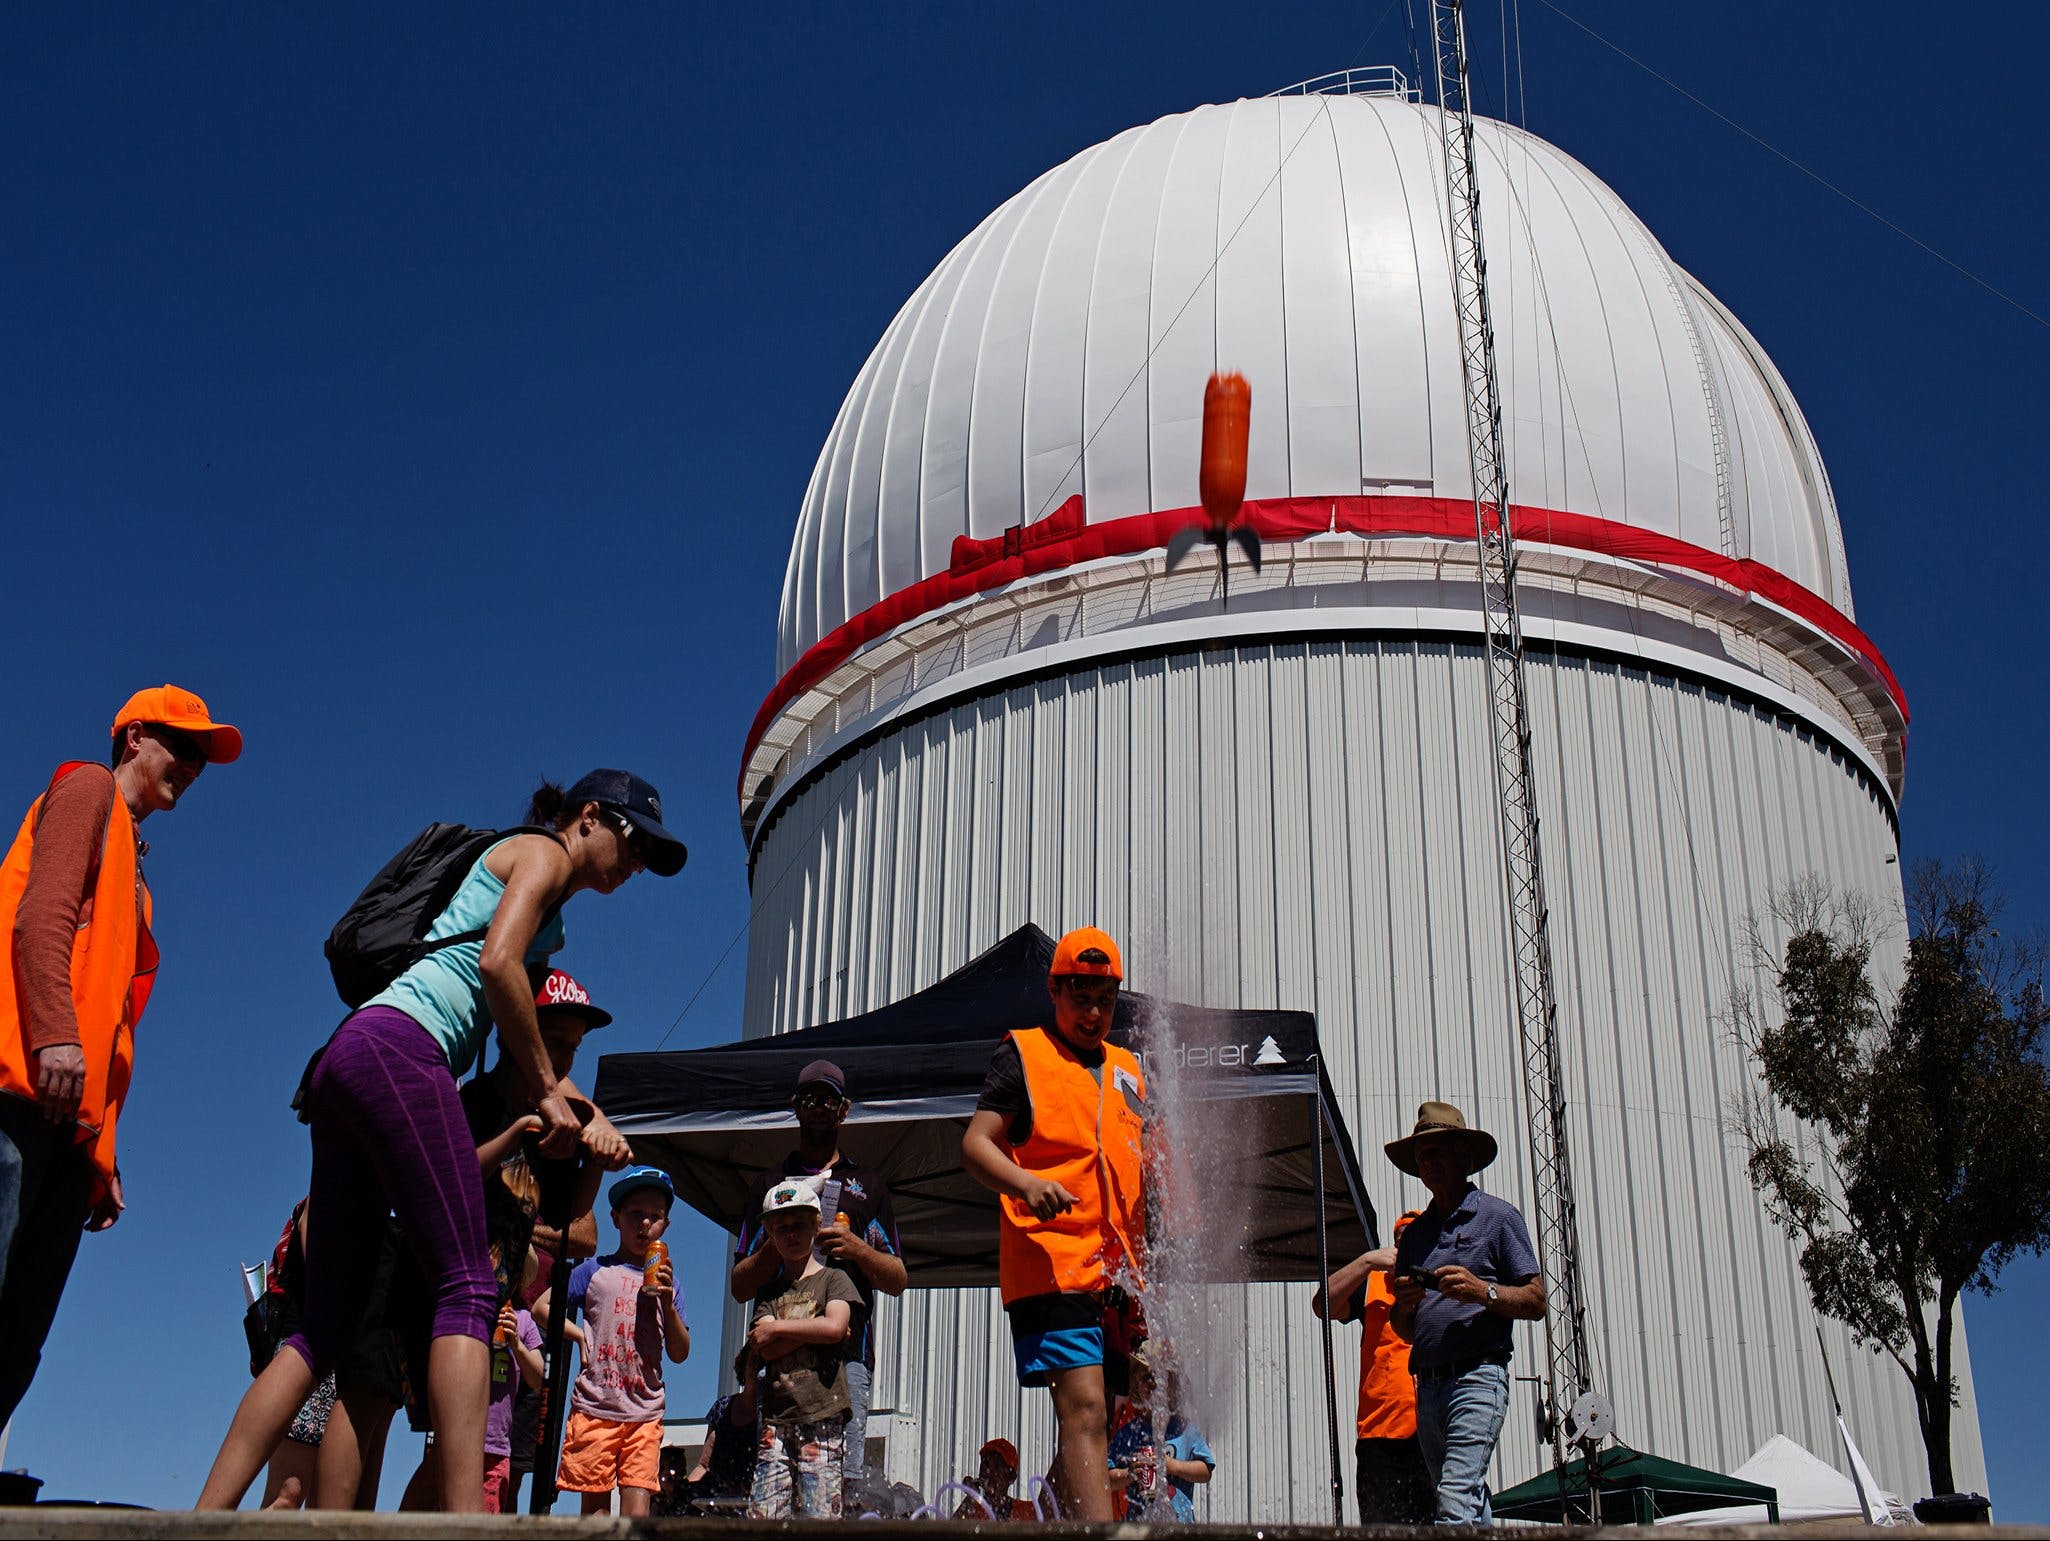 Siding Spring Observatory Open Day - Cancelled due to COVID 19 - Pubs and Clubs